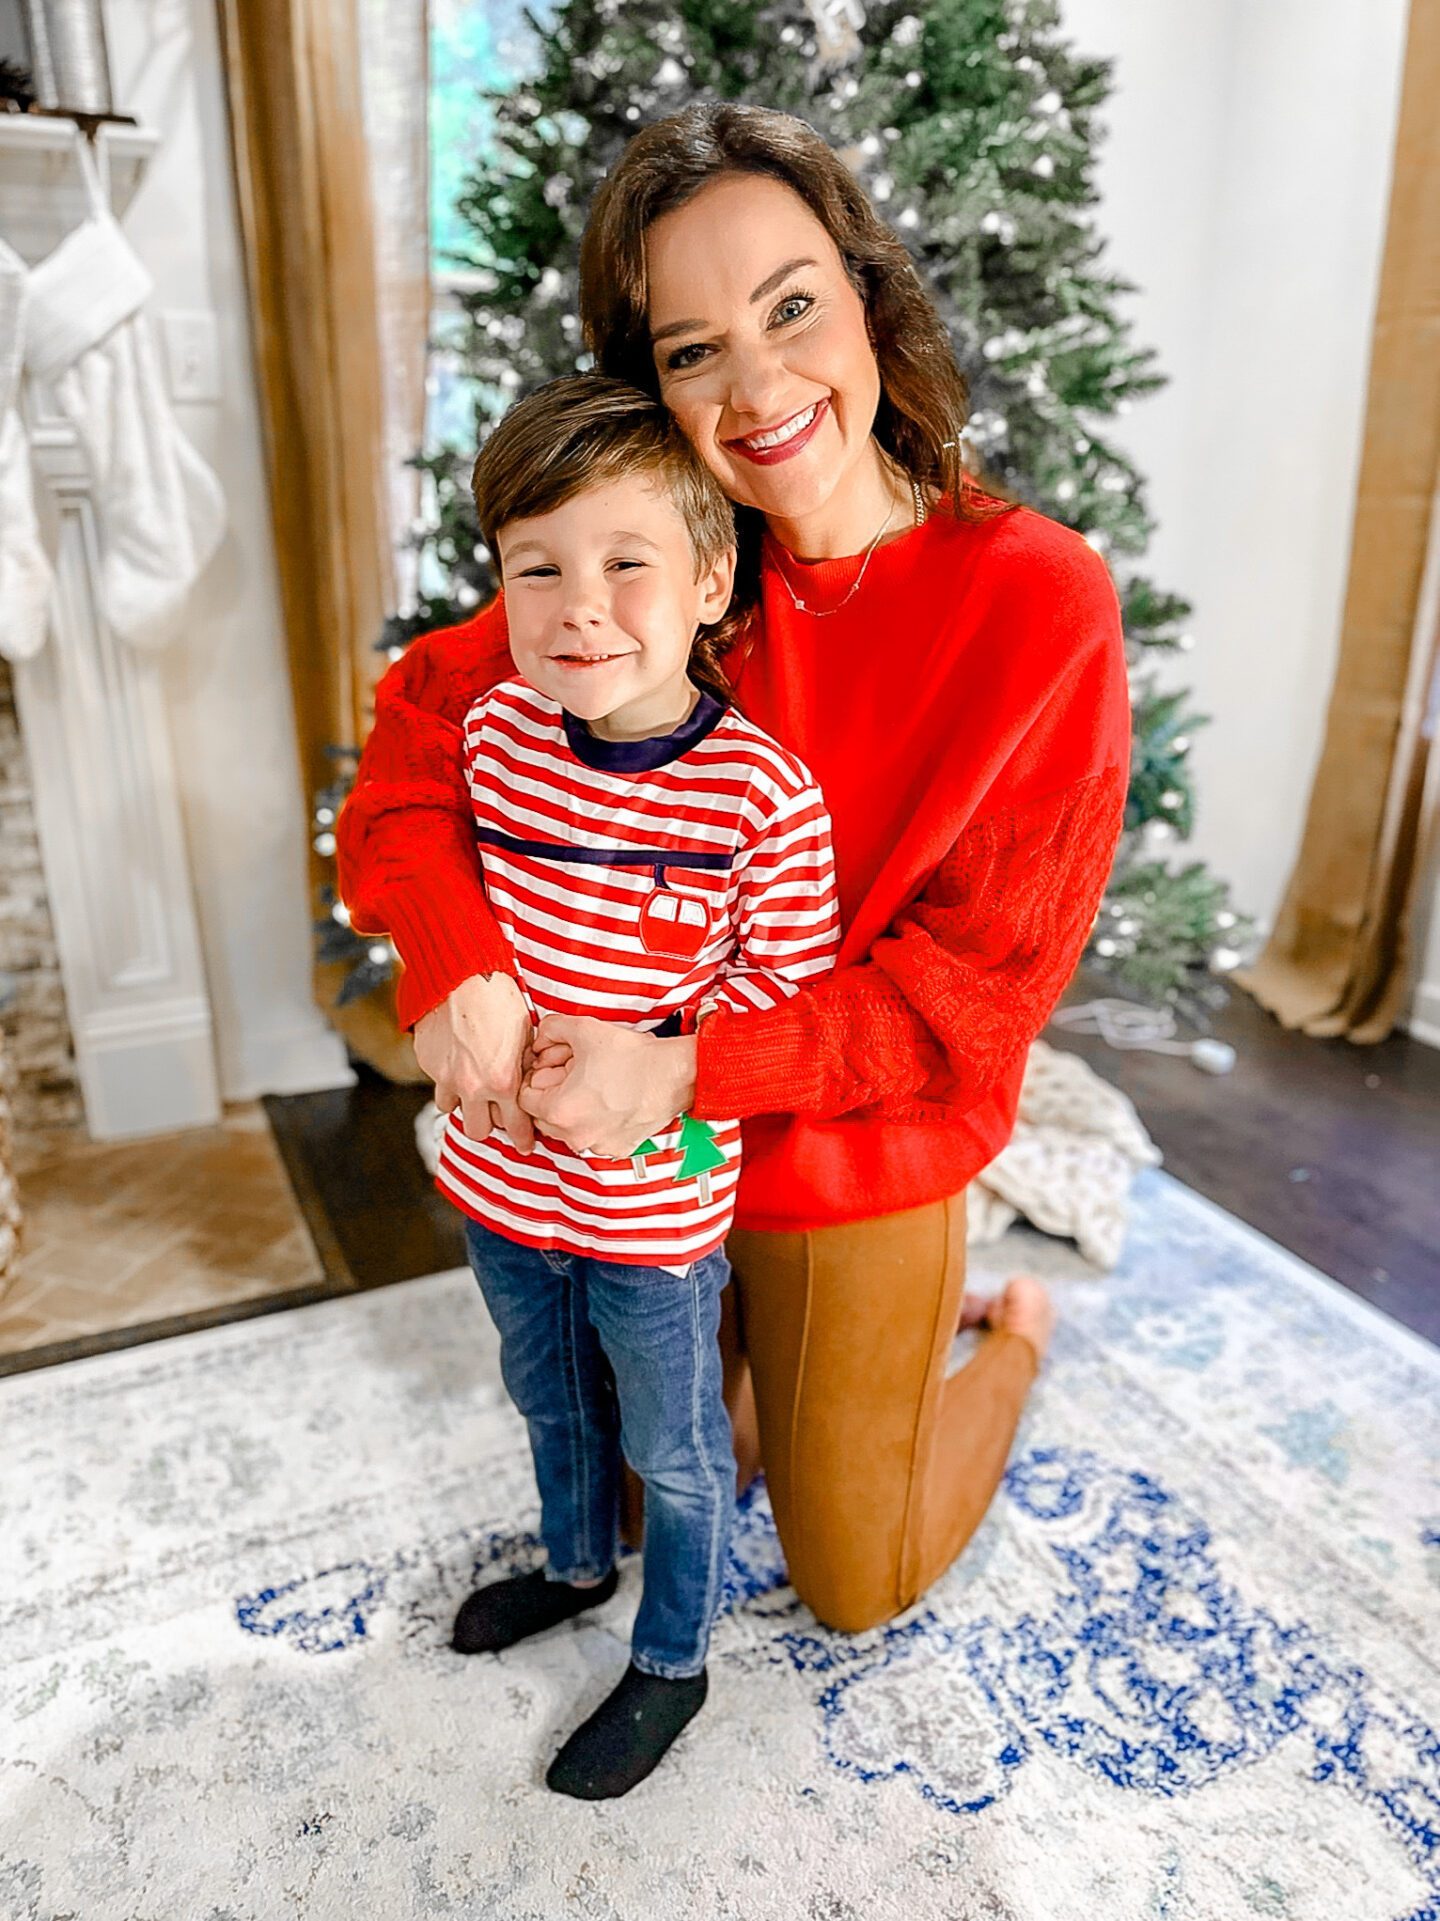 Christian Birmingham podcaster & health coach, Heather Brown, shares the best gift ideas for boy moms for Christmas.